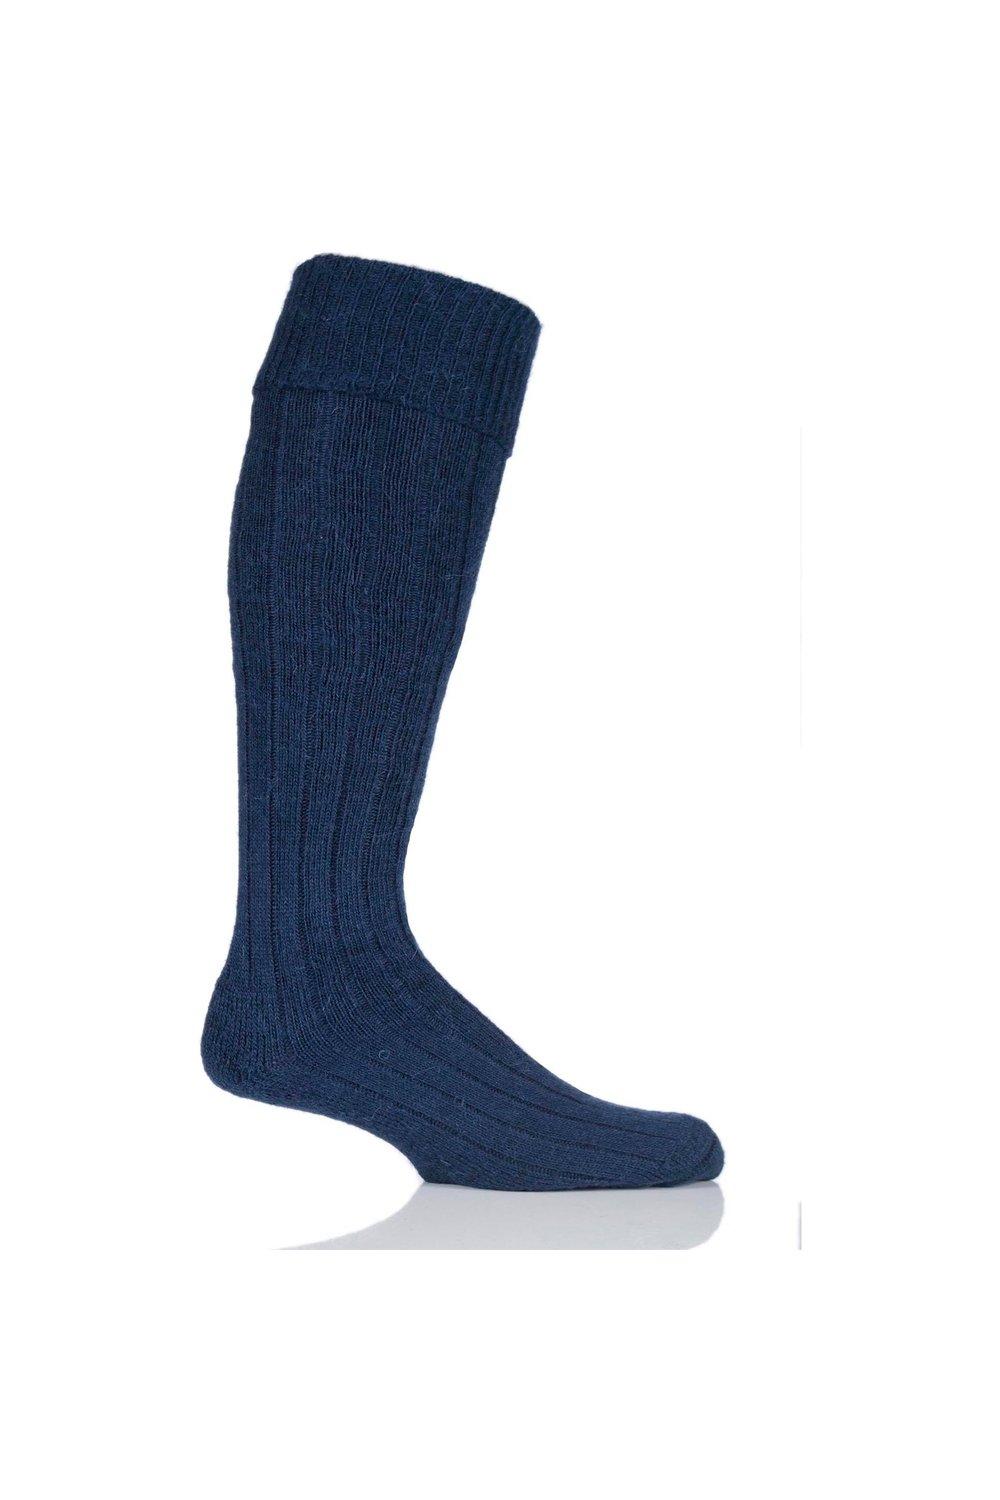 1 Pair Mohair Knee High Socks With Extra Cushioning and Ribbed Top